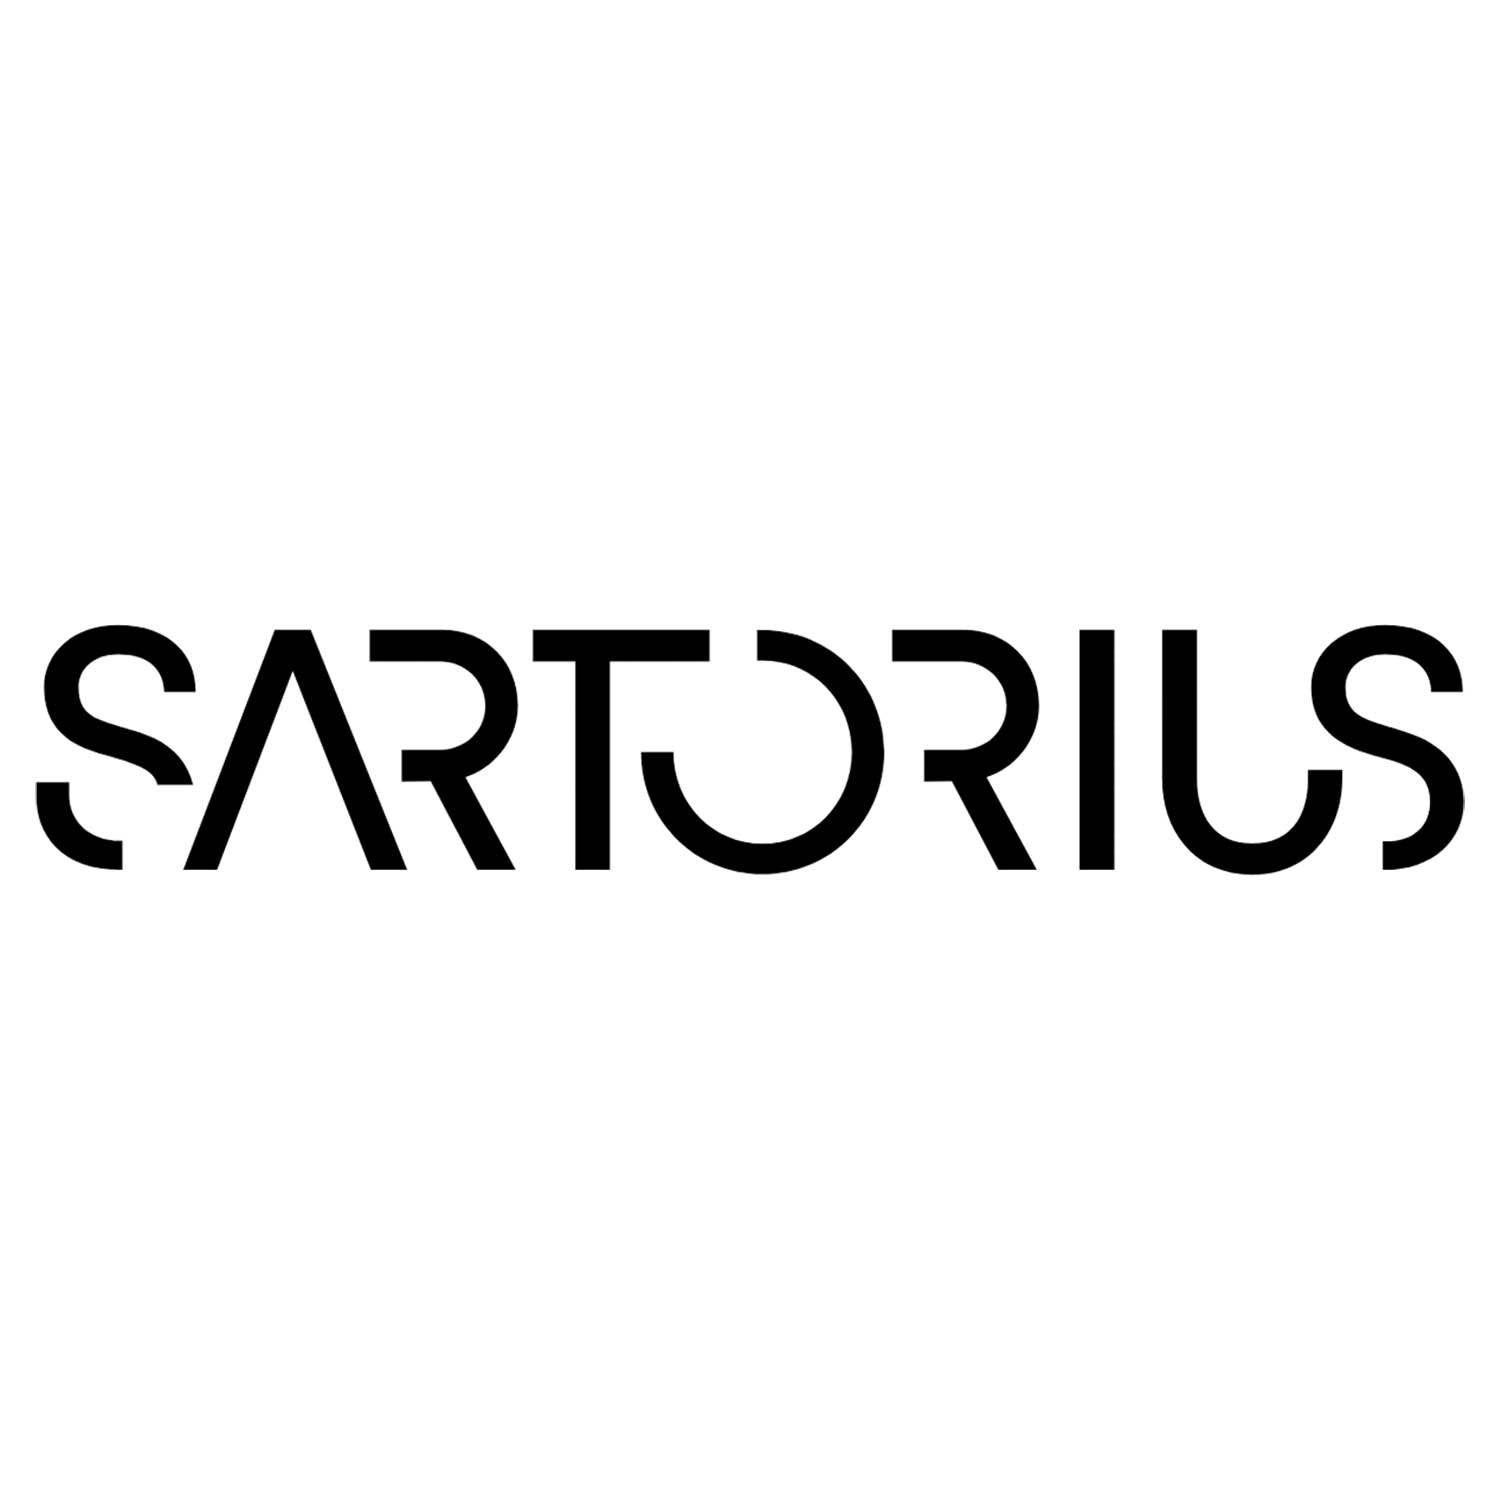 Sartorius FT-2-335-203203R, Technical papers,creped/Grd 603/N 1000pk